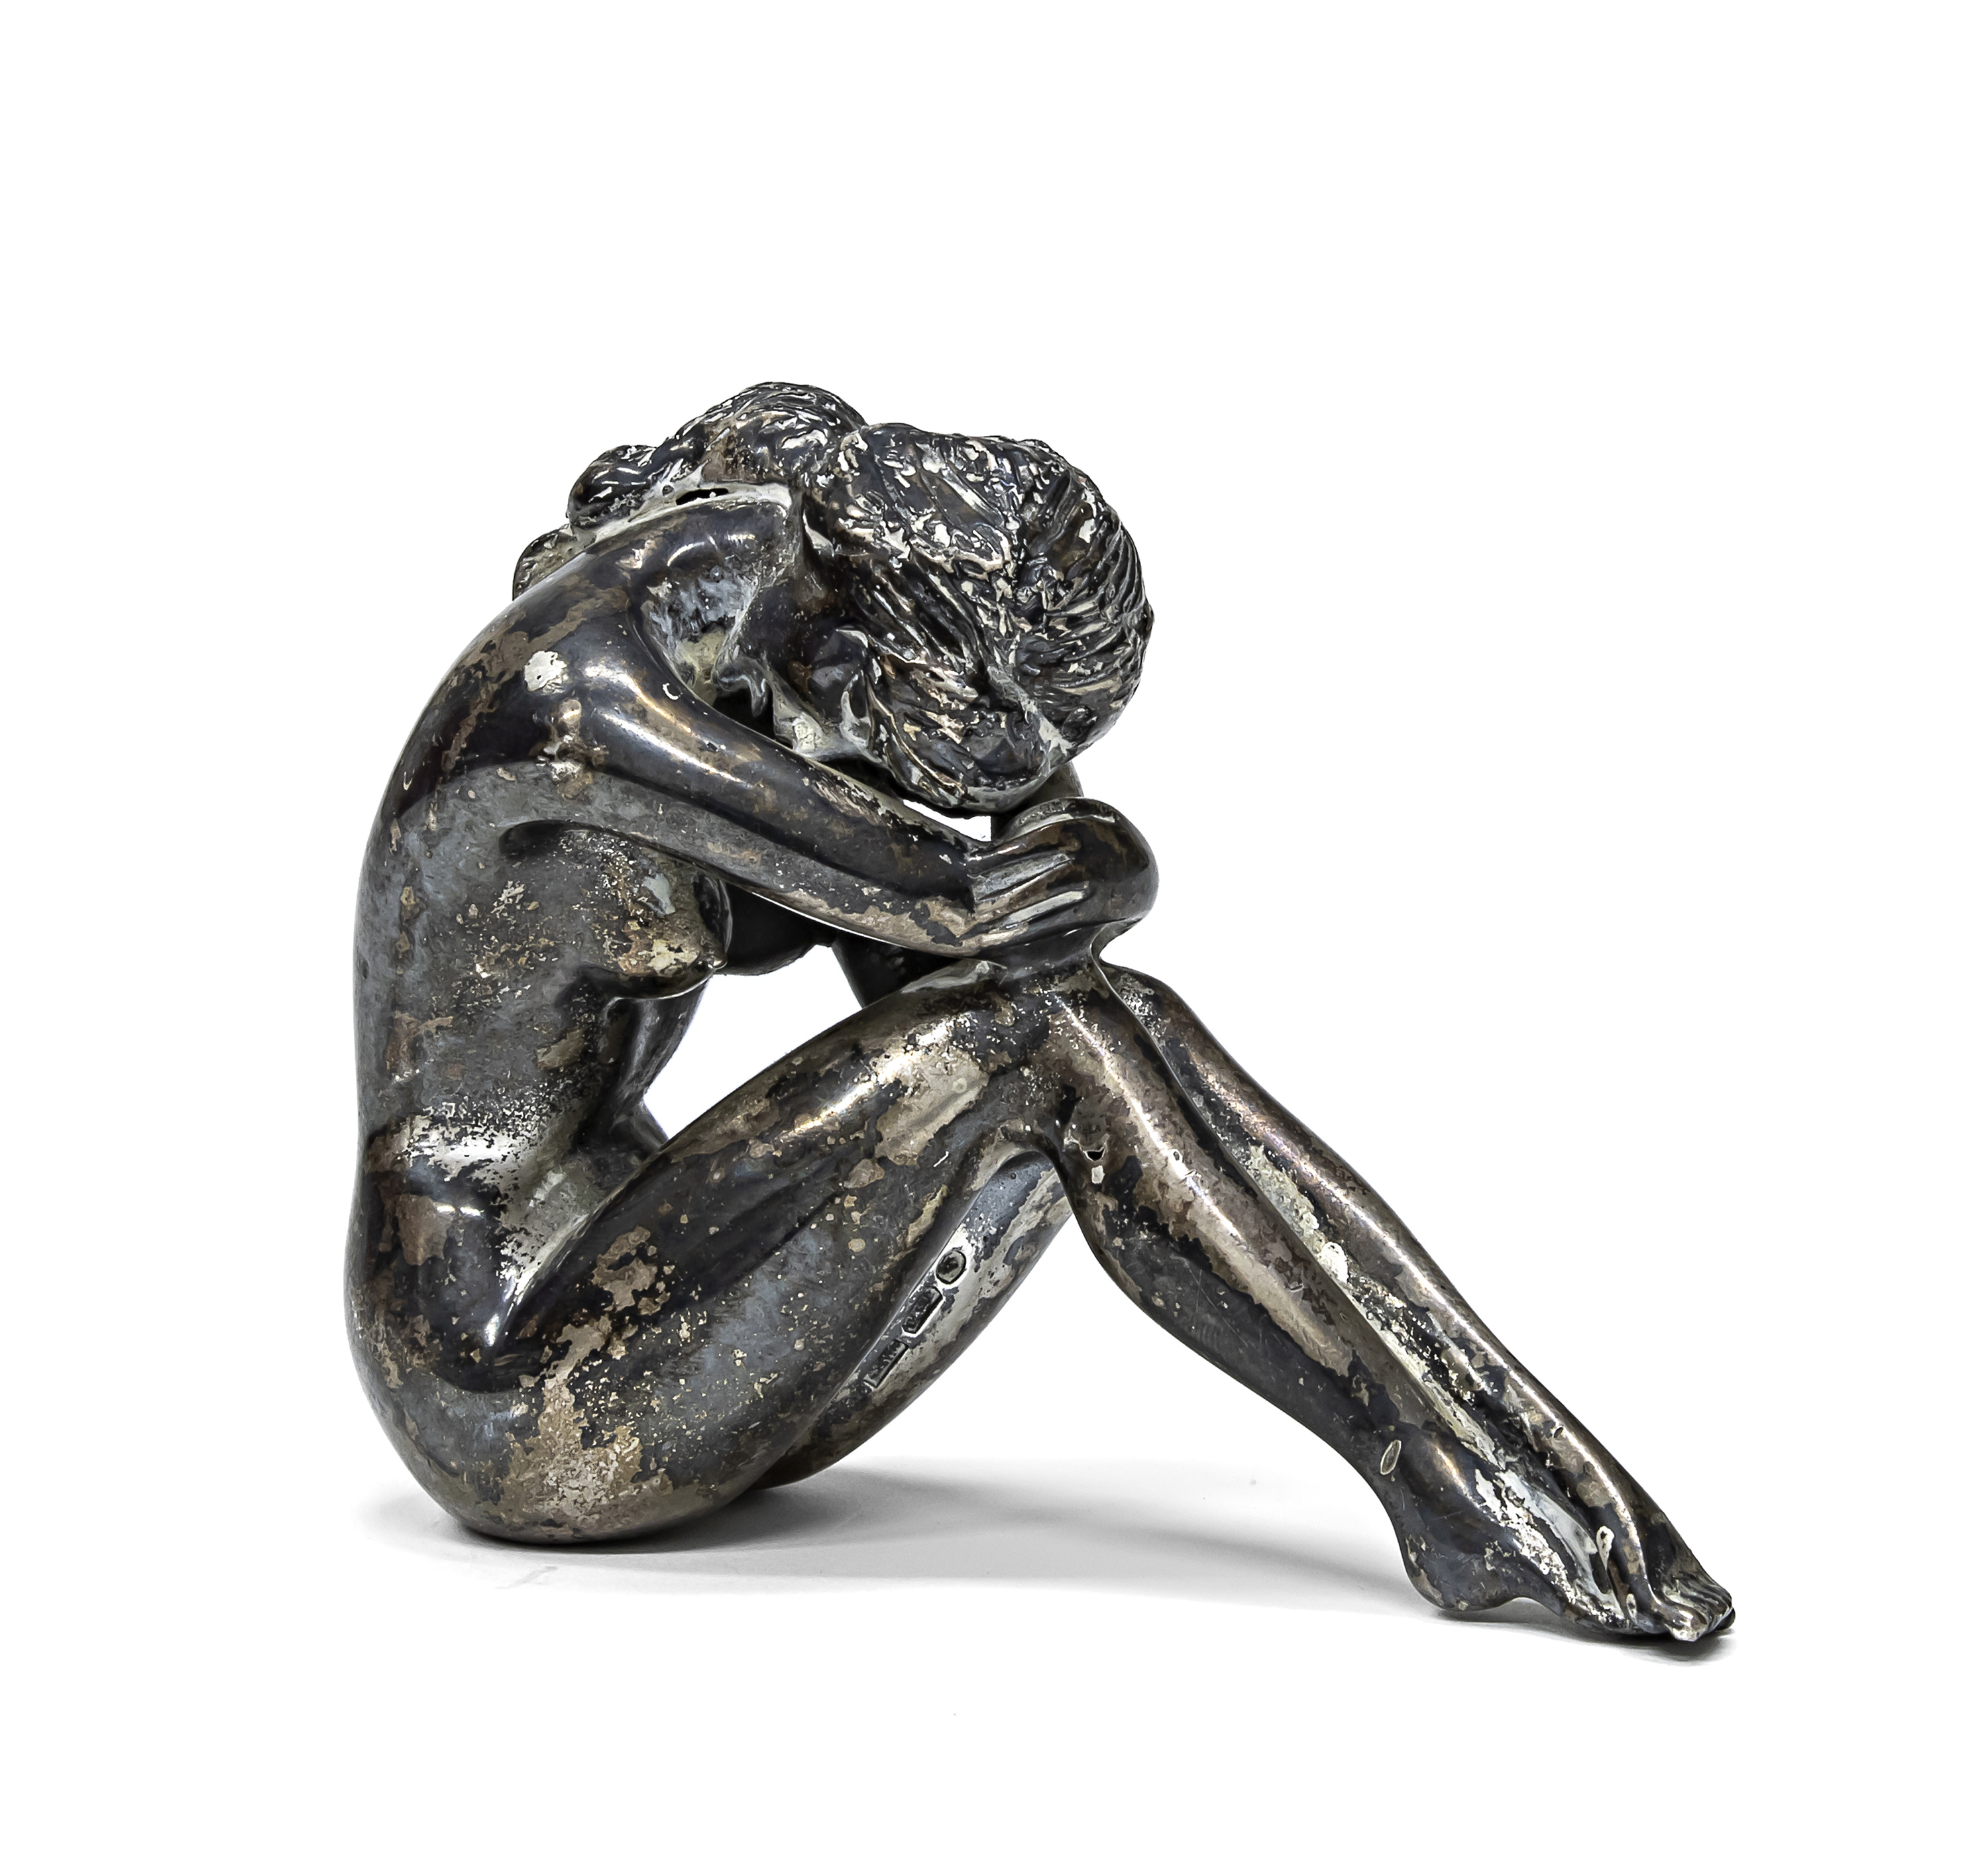 SILVER SCULPTURE ITALY LATE 20TH CENTURY